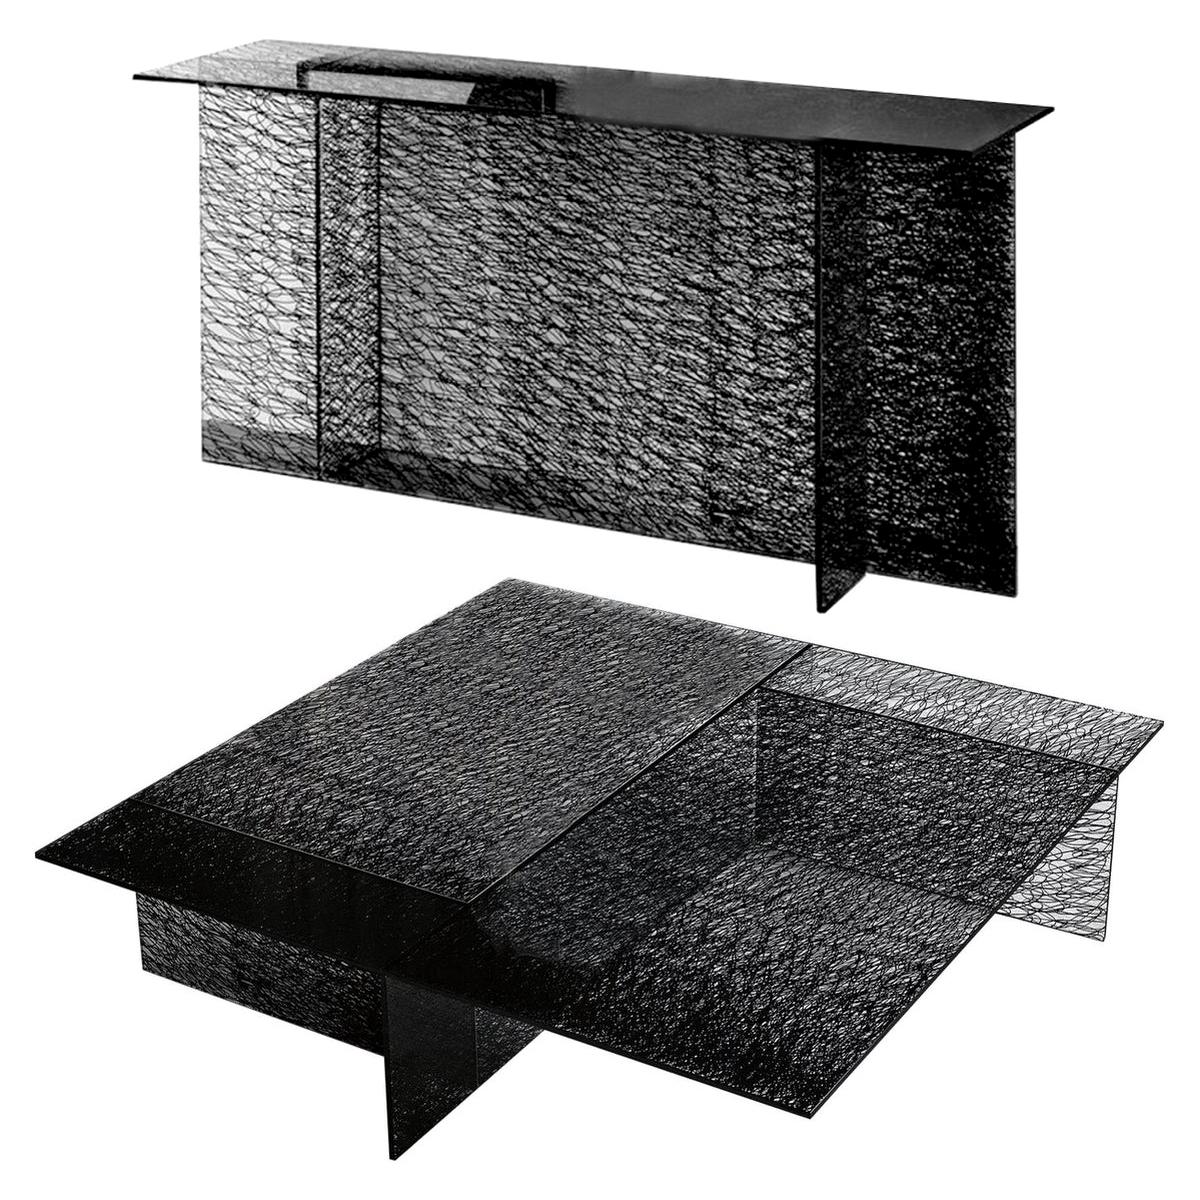 Set of Sestante Black Glass Coffee Table and Console